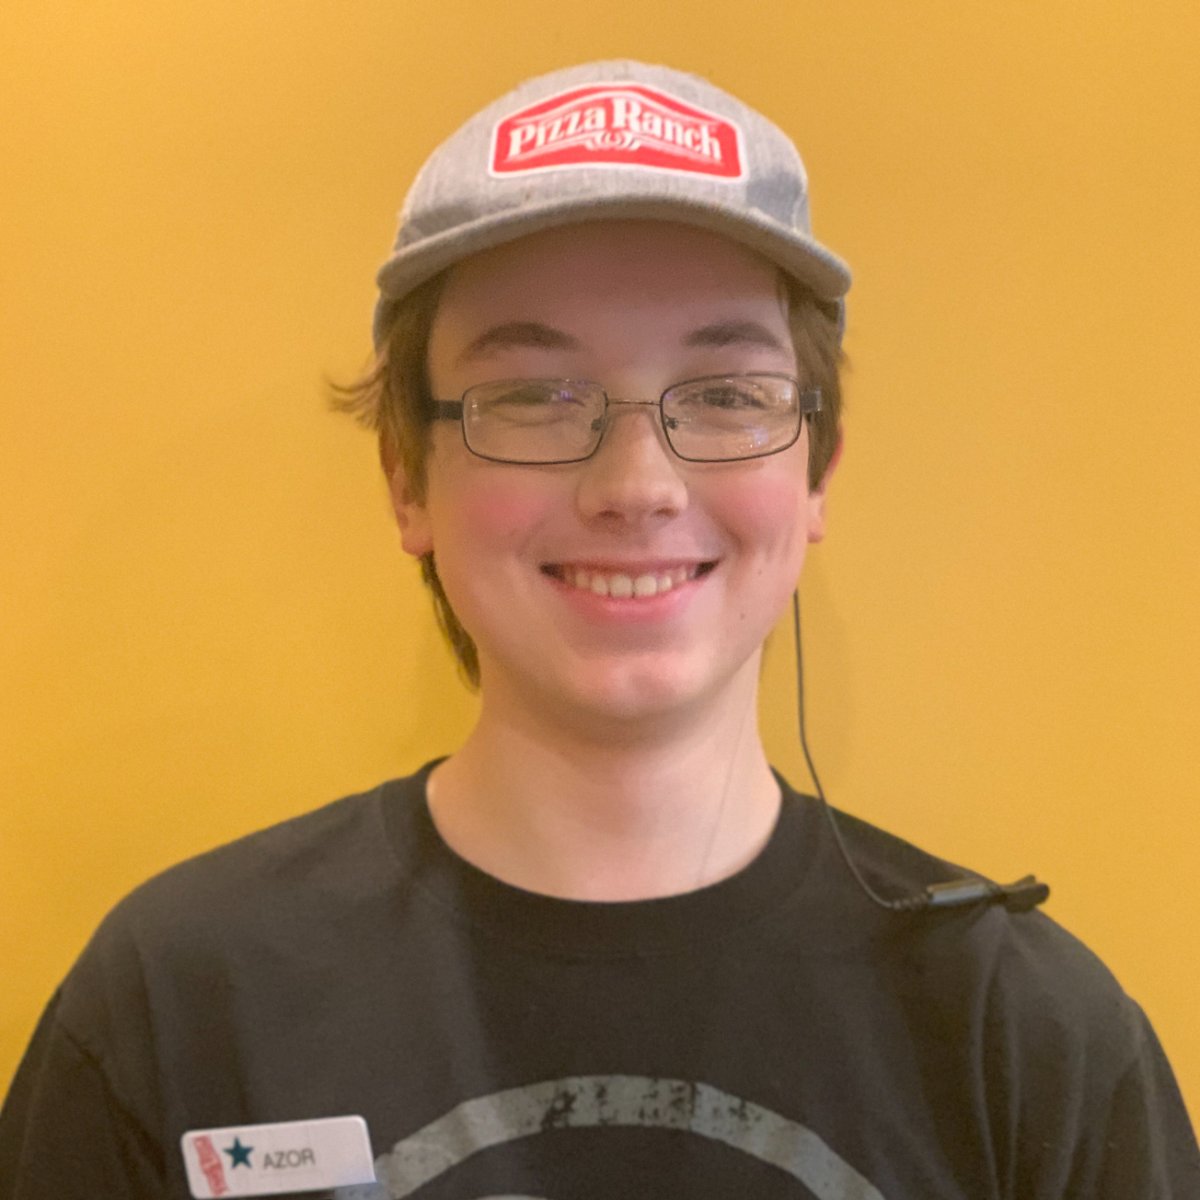 It's #TeamMemberTuesday! Meet Azor, part of our team since May. Azor dreams of launching his YouTube Channel and maybe even earning from it.

Why does he enjoy Pizza Ranch? The interactions with guests and co-workers!

His current favorite? Thin Crust BLT pizza! 🍕📺